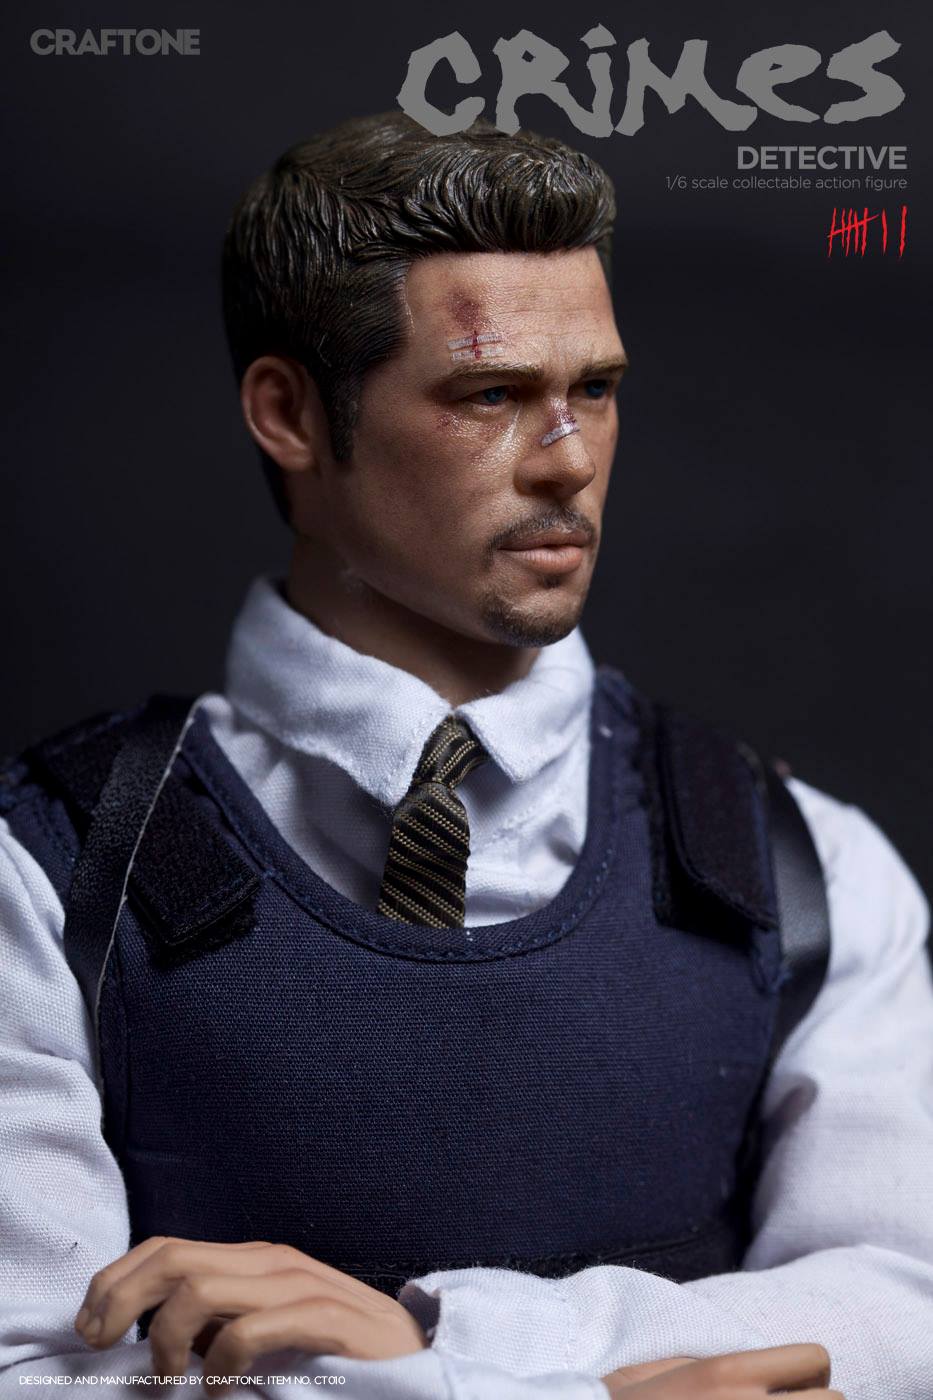 toyhaven: Incoming: CRAFTONE 1/6th scale CRIMES Detective 12 